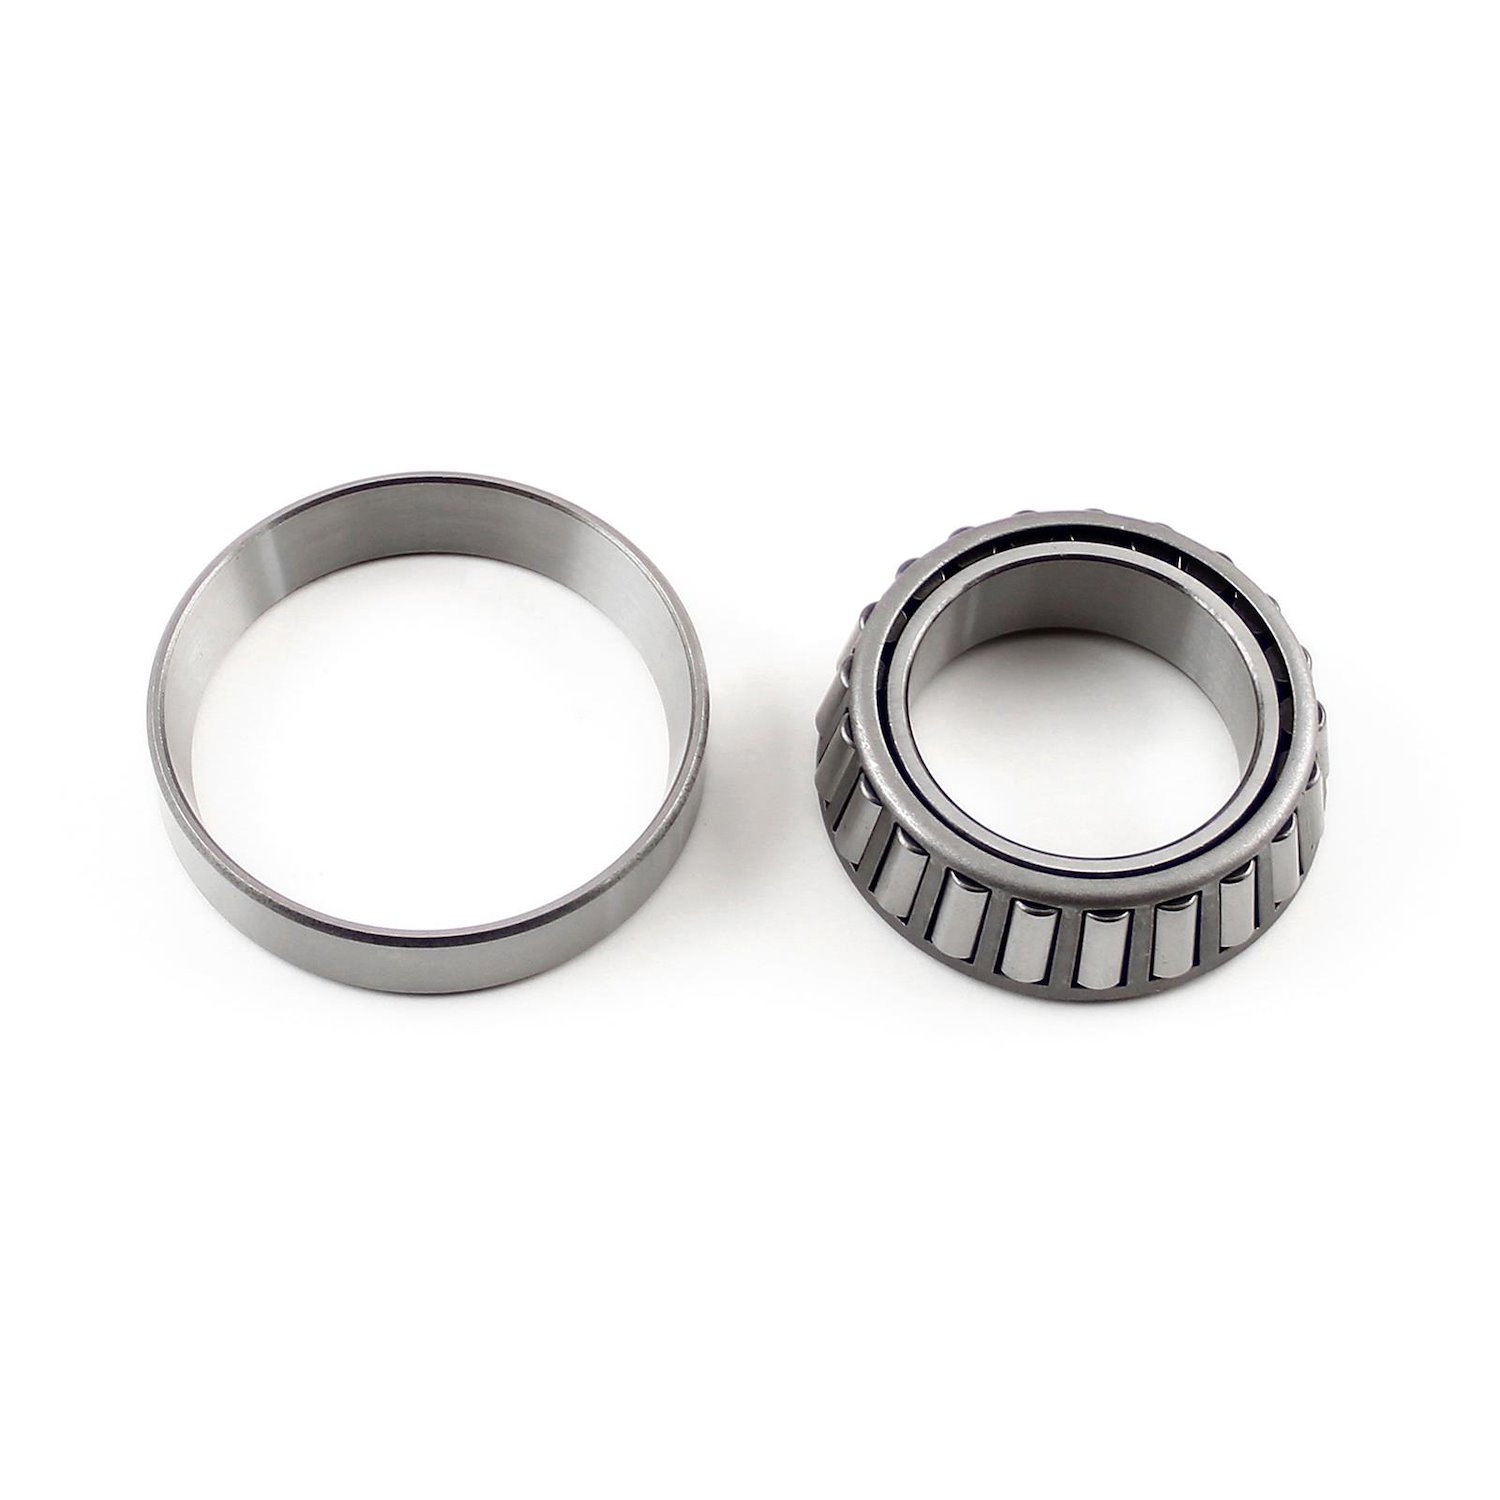 Carrier Bearing Industry Std Ref Lm104949/ 911